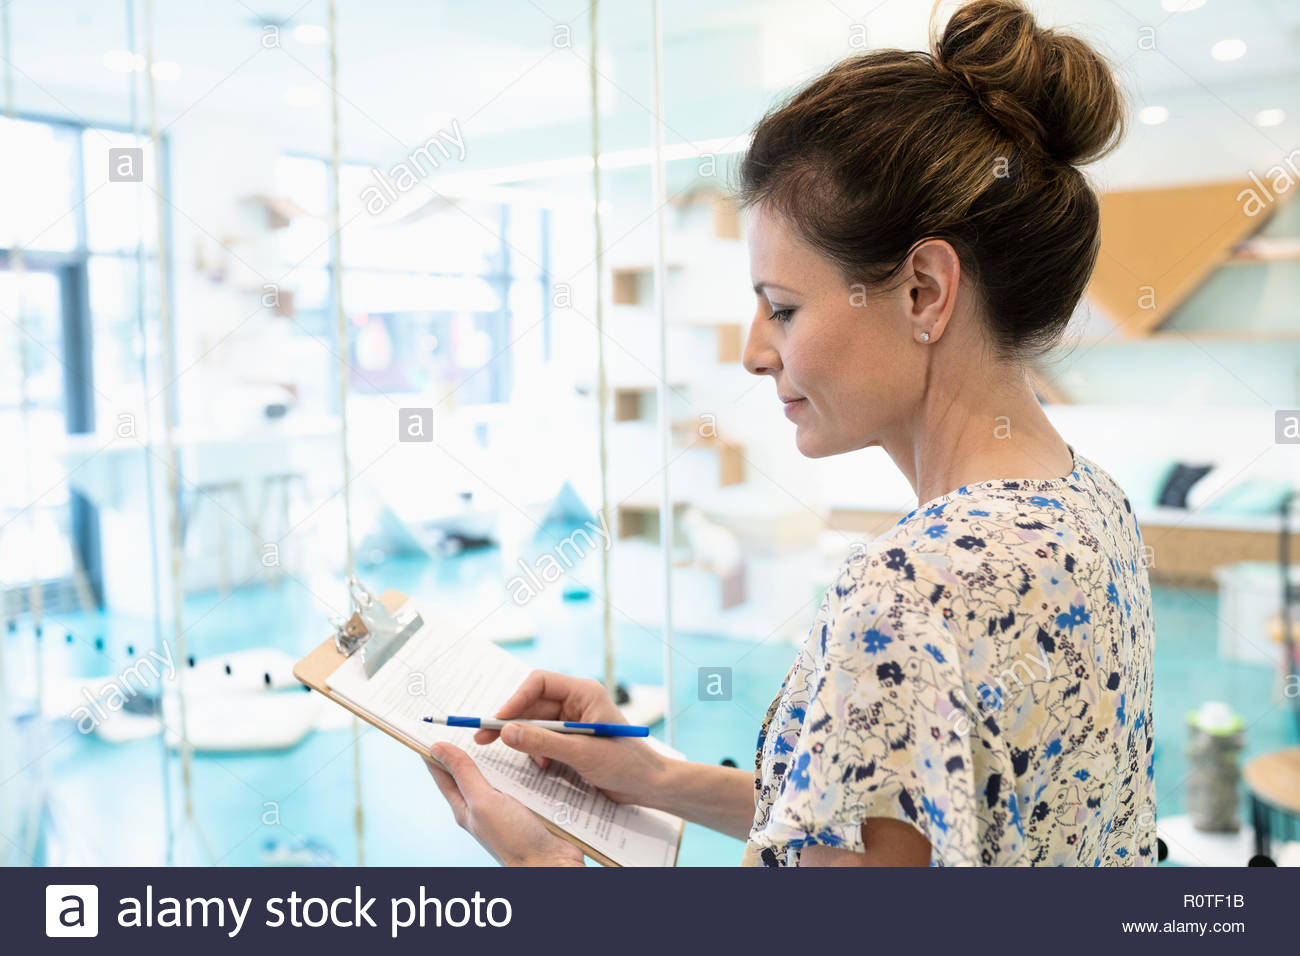 Woman filling out adoption application in cat cafe Stock Photo